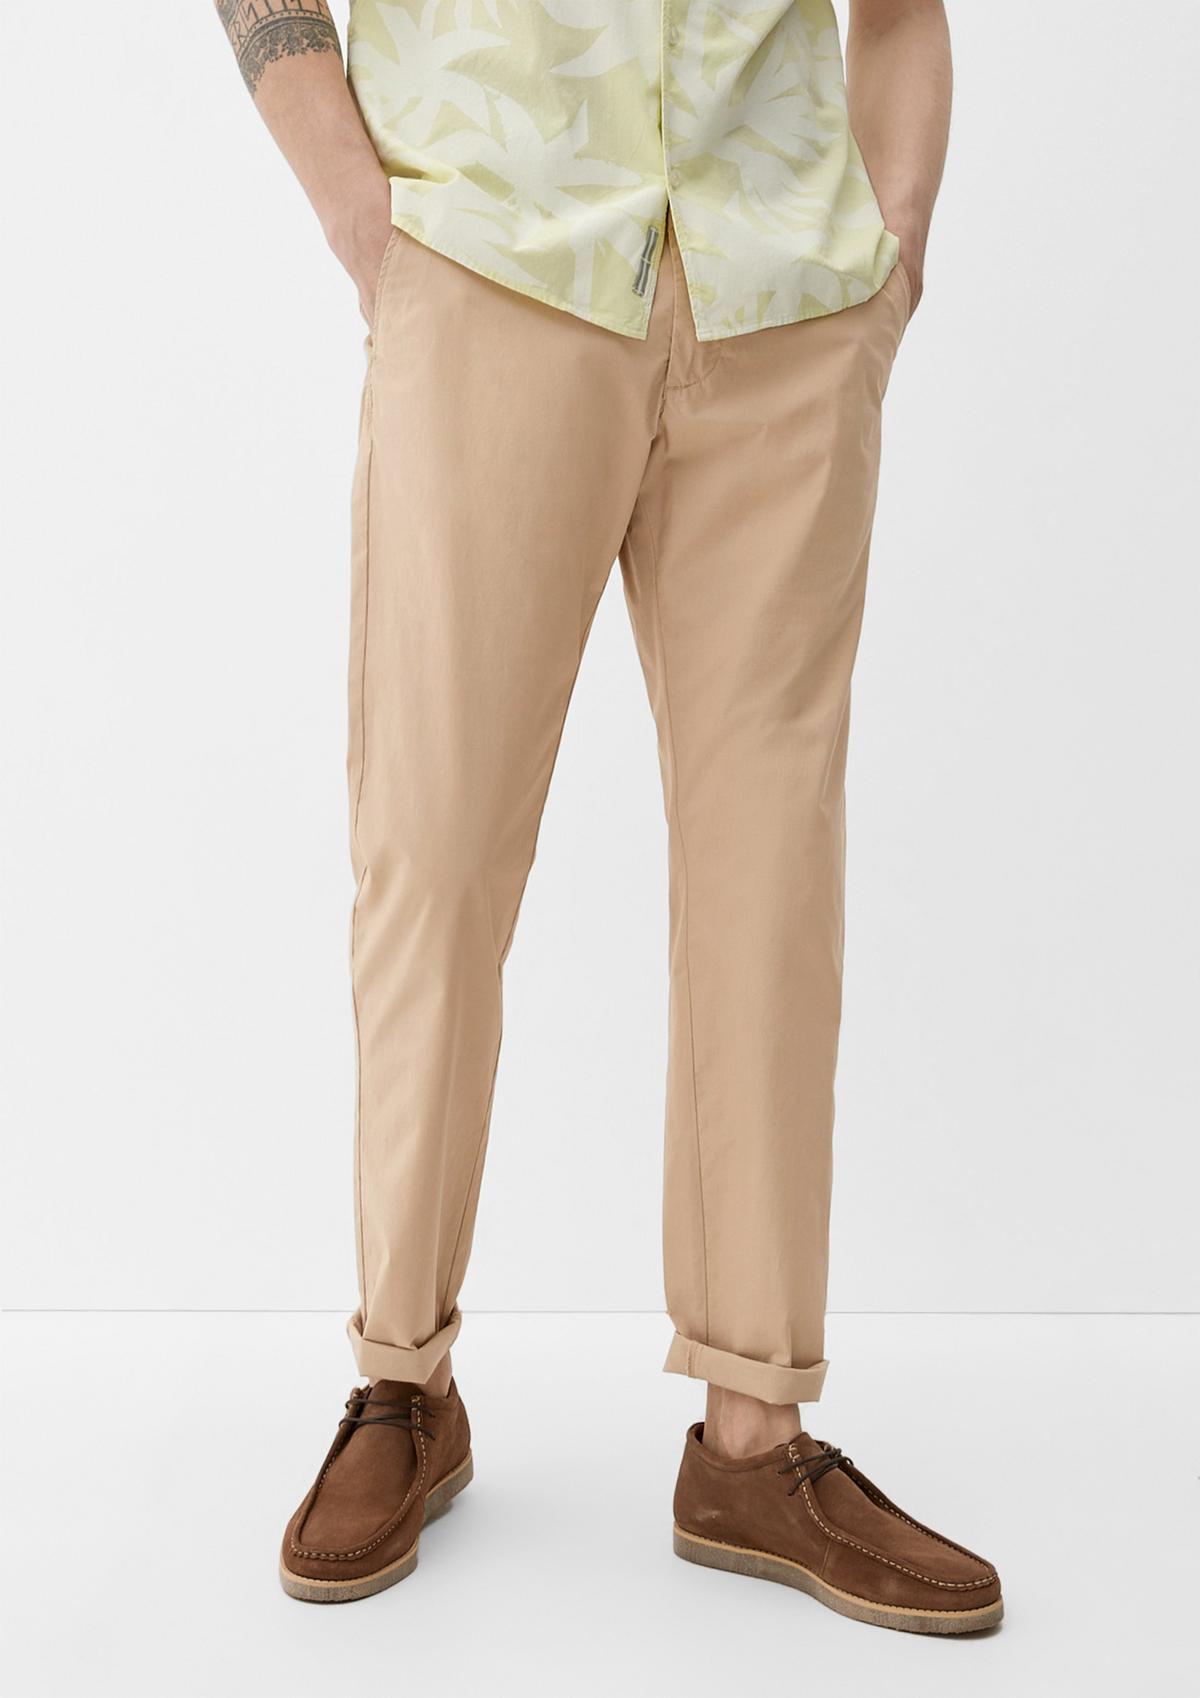 s.Oliver trousers made of stretch cotton